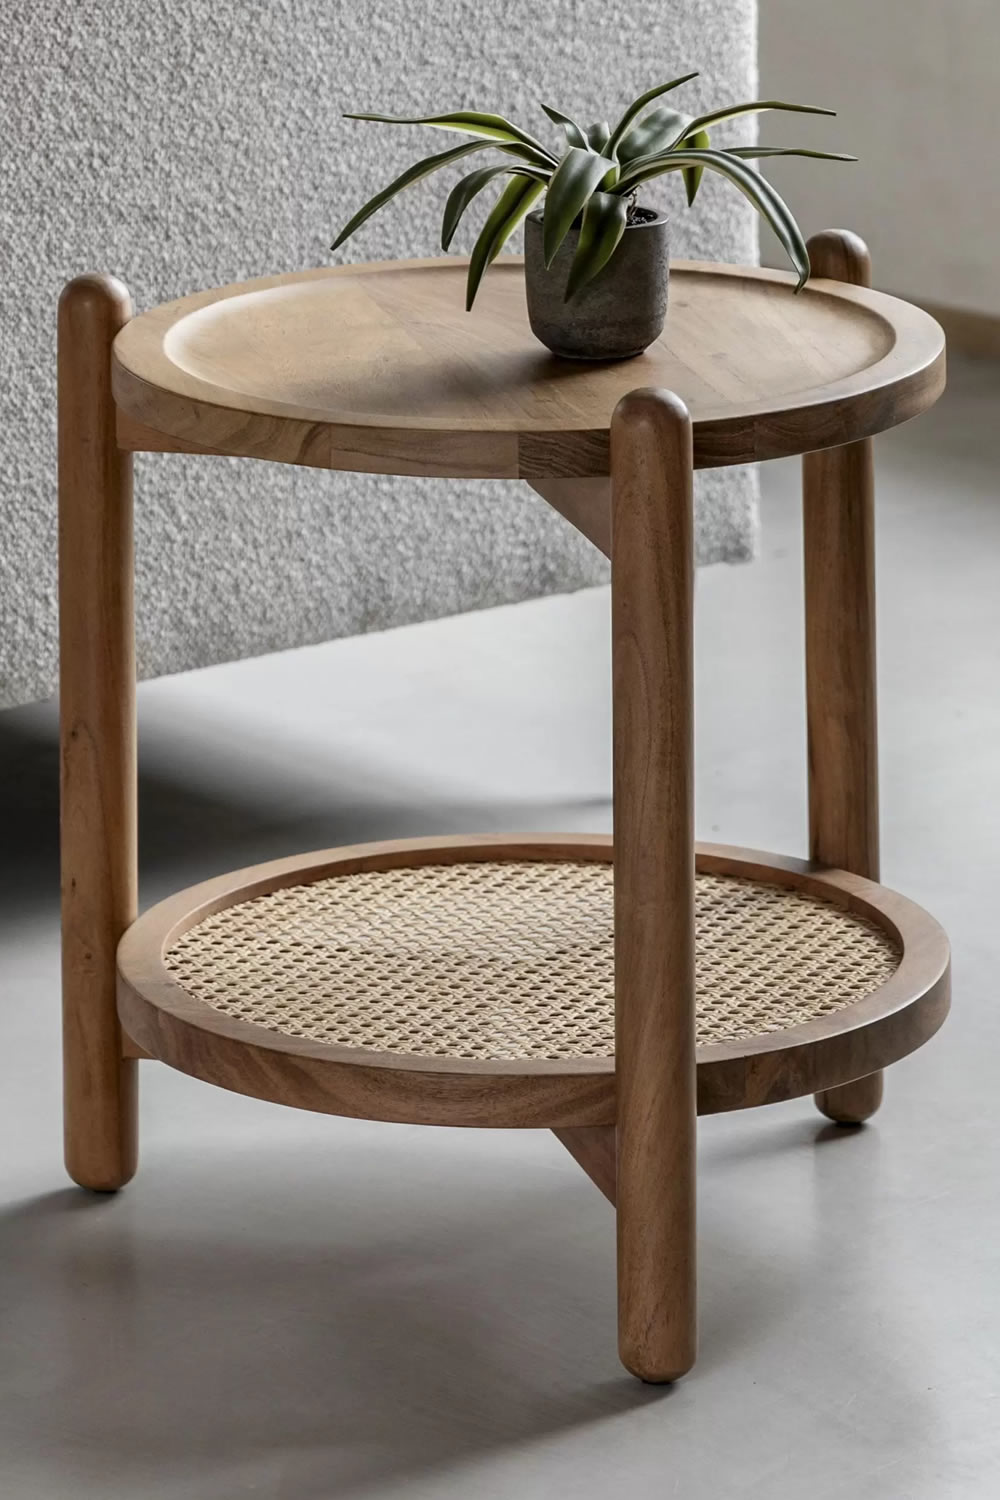 View Cannes 2Tier Side Table Crafted From Solid Acacia Wood Woven Rattan Lower Shelf For Extra Storage Boho Design Matching Furniture Available information